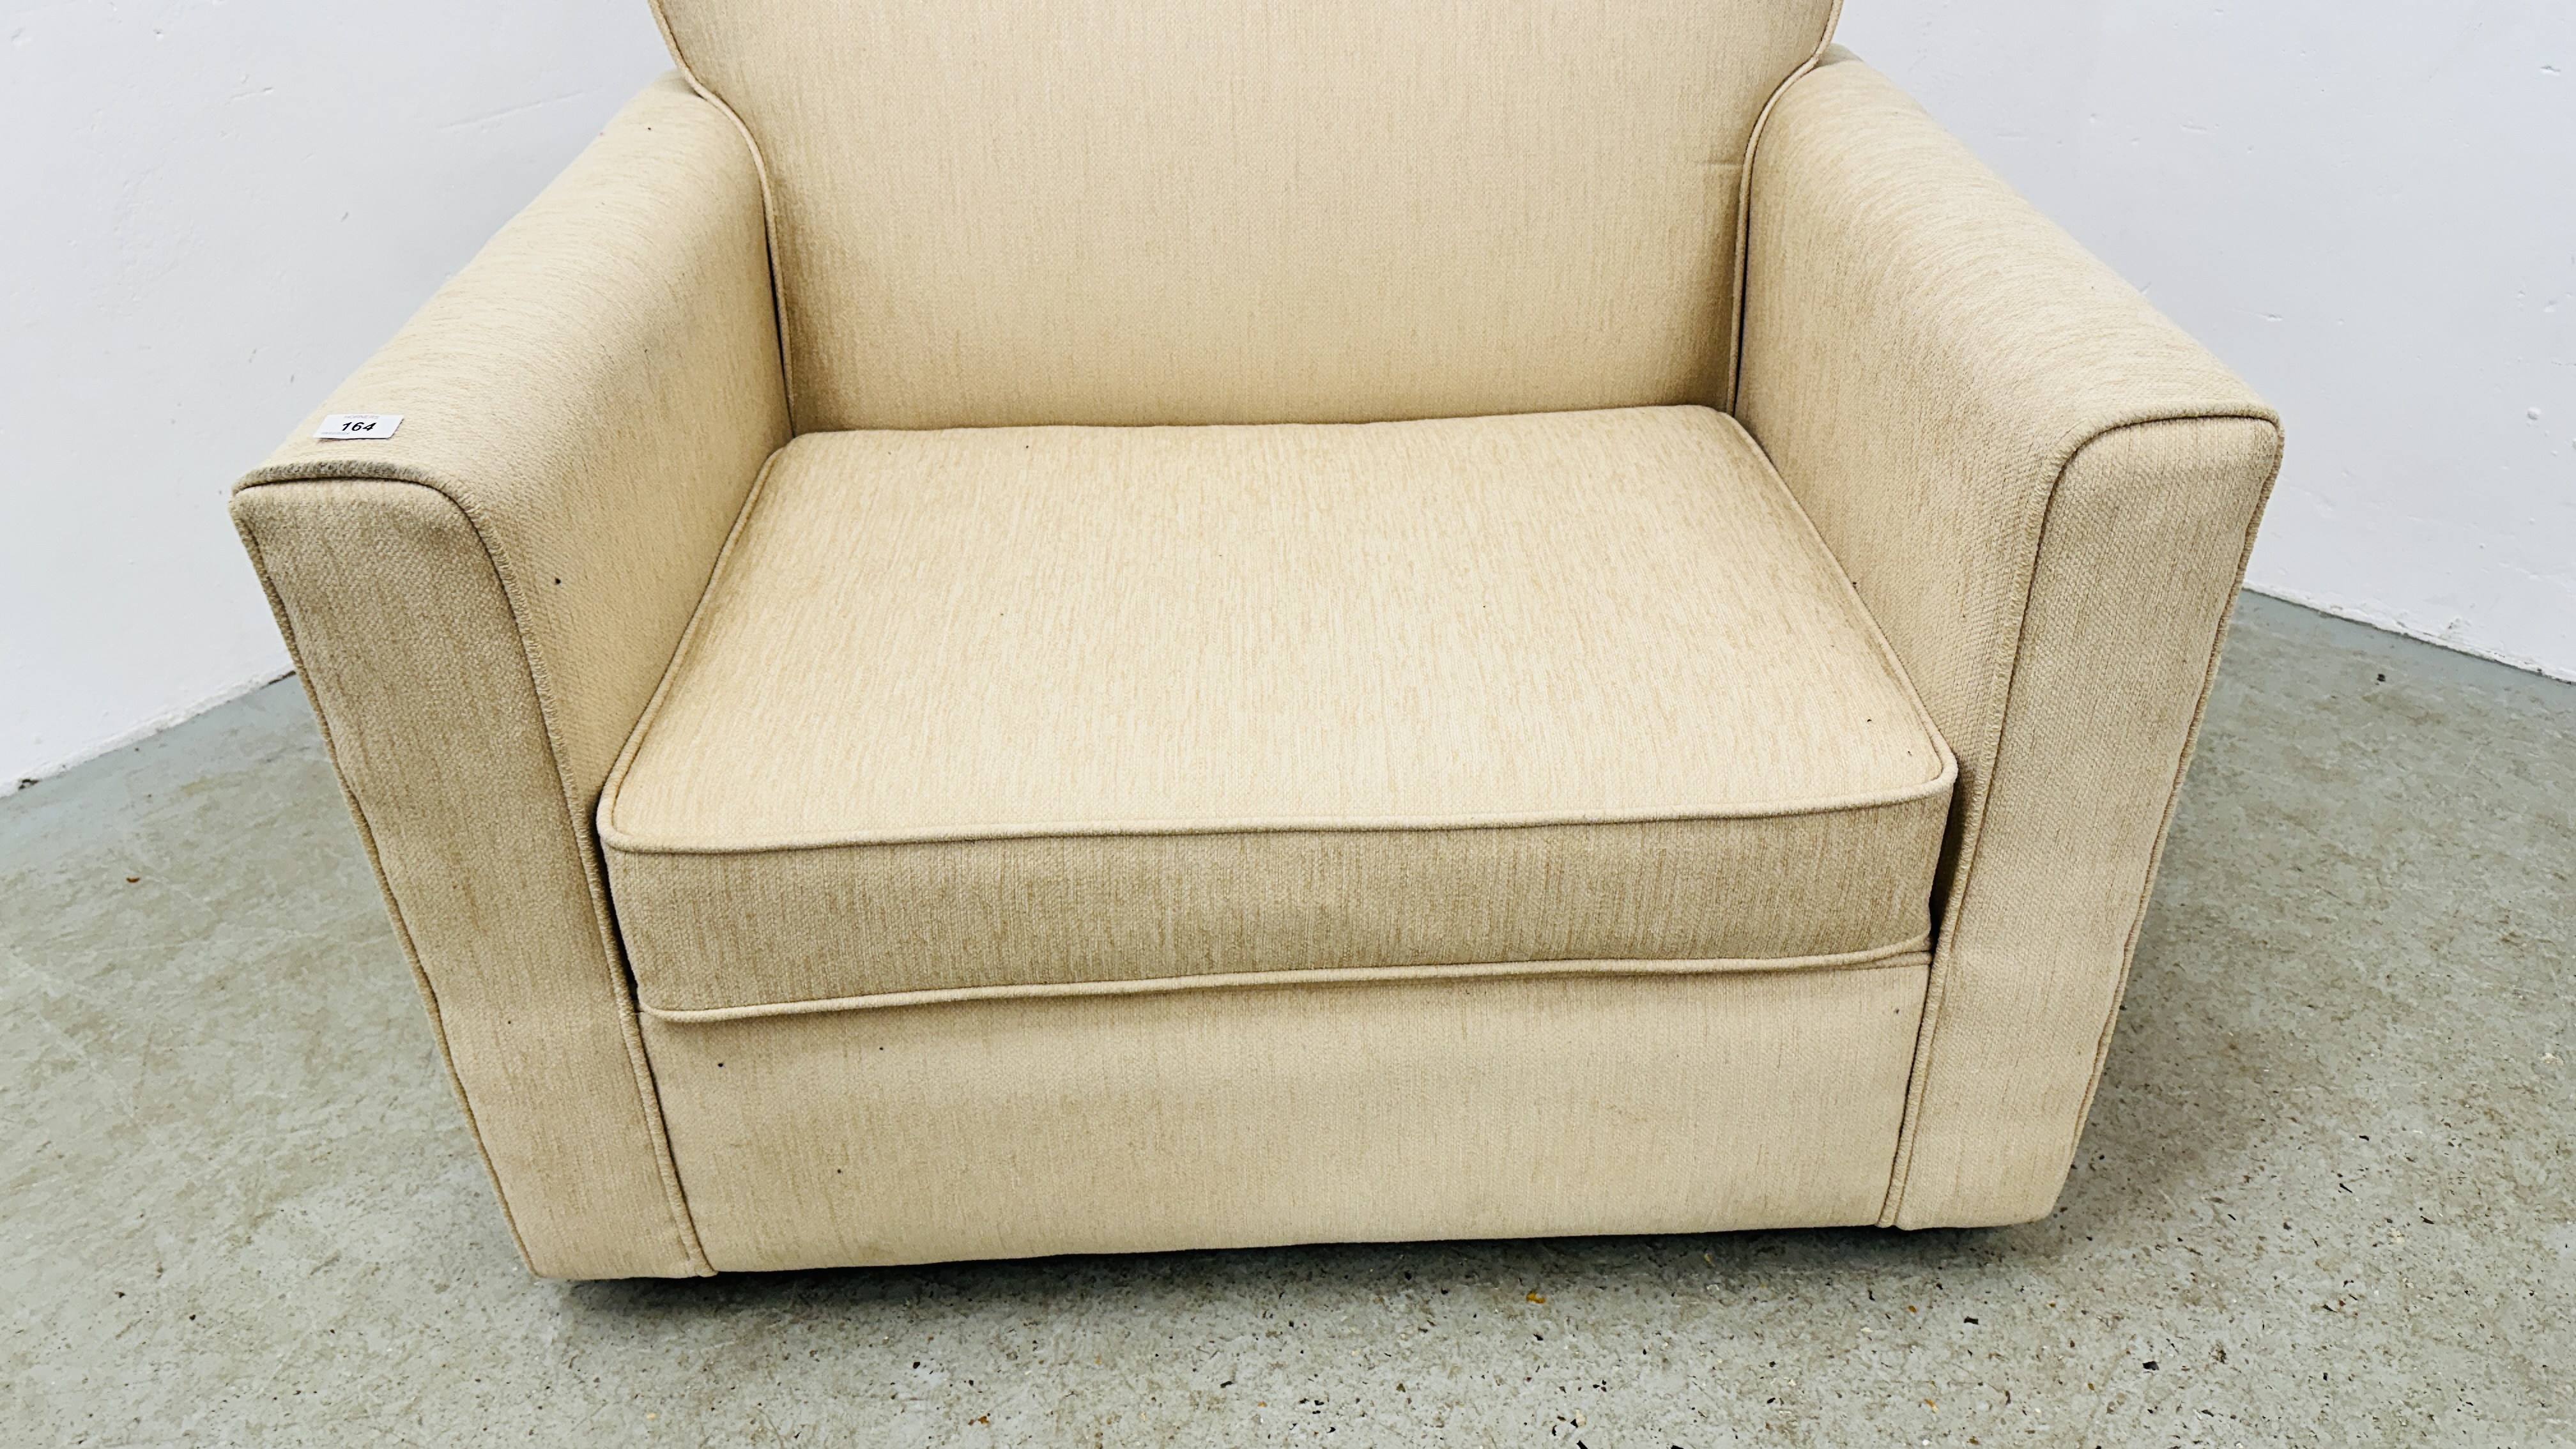 CREAM UPHOLSTERED ARM CHAIR / SOFA BED. - Image 9 of 12